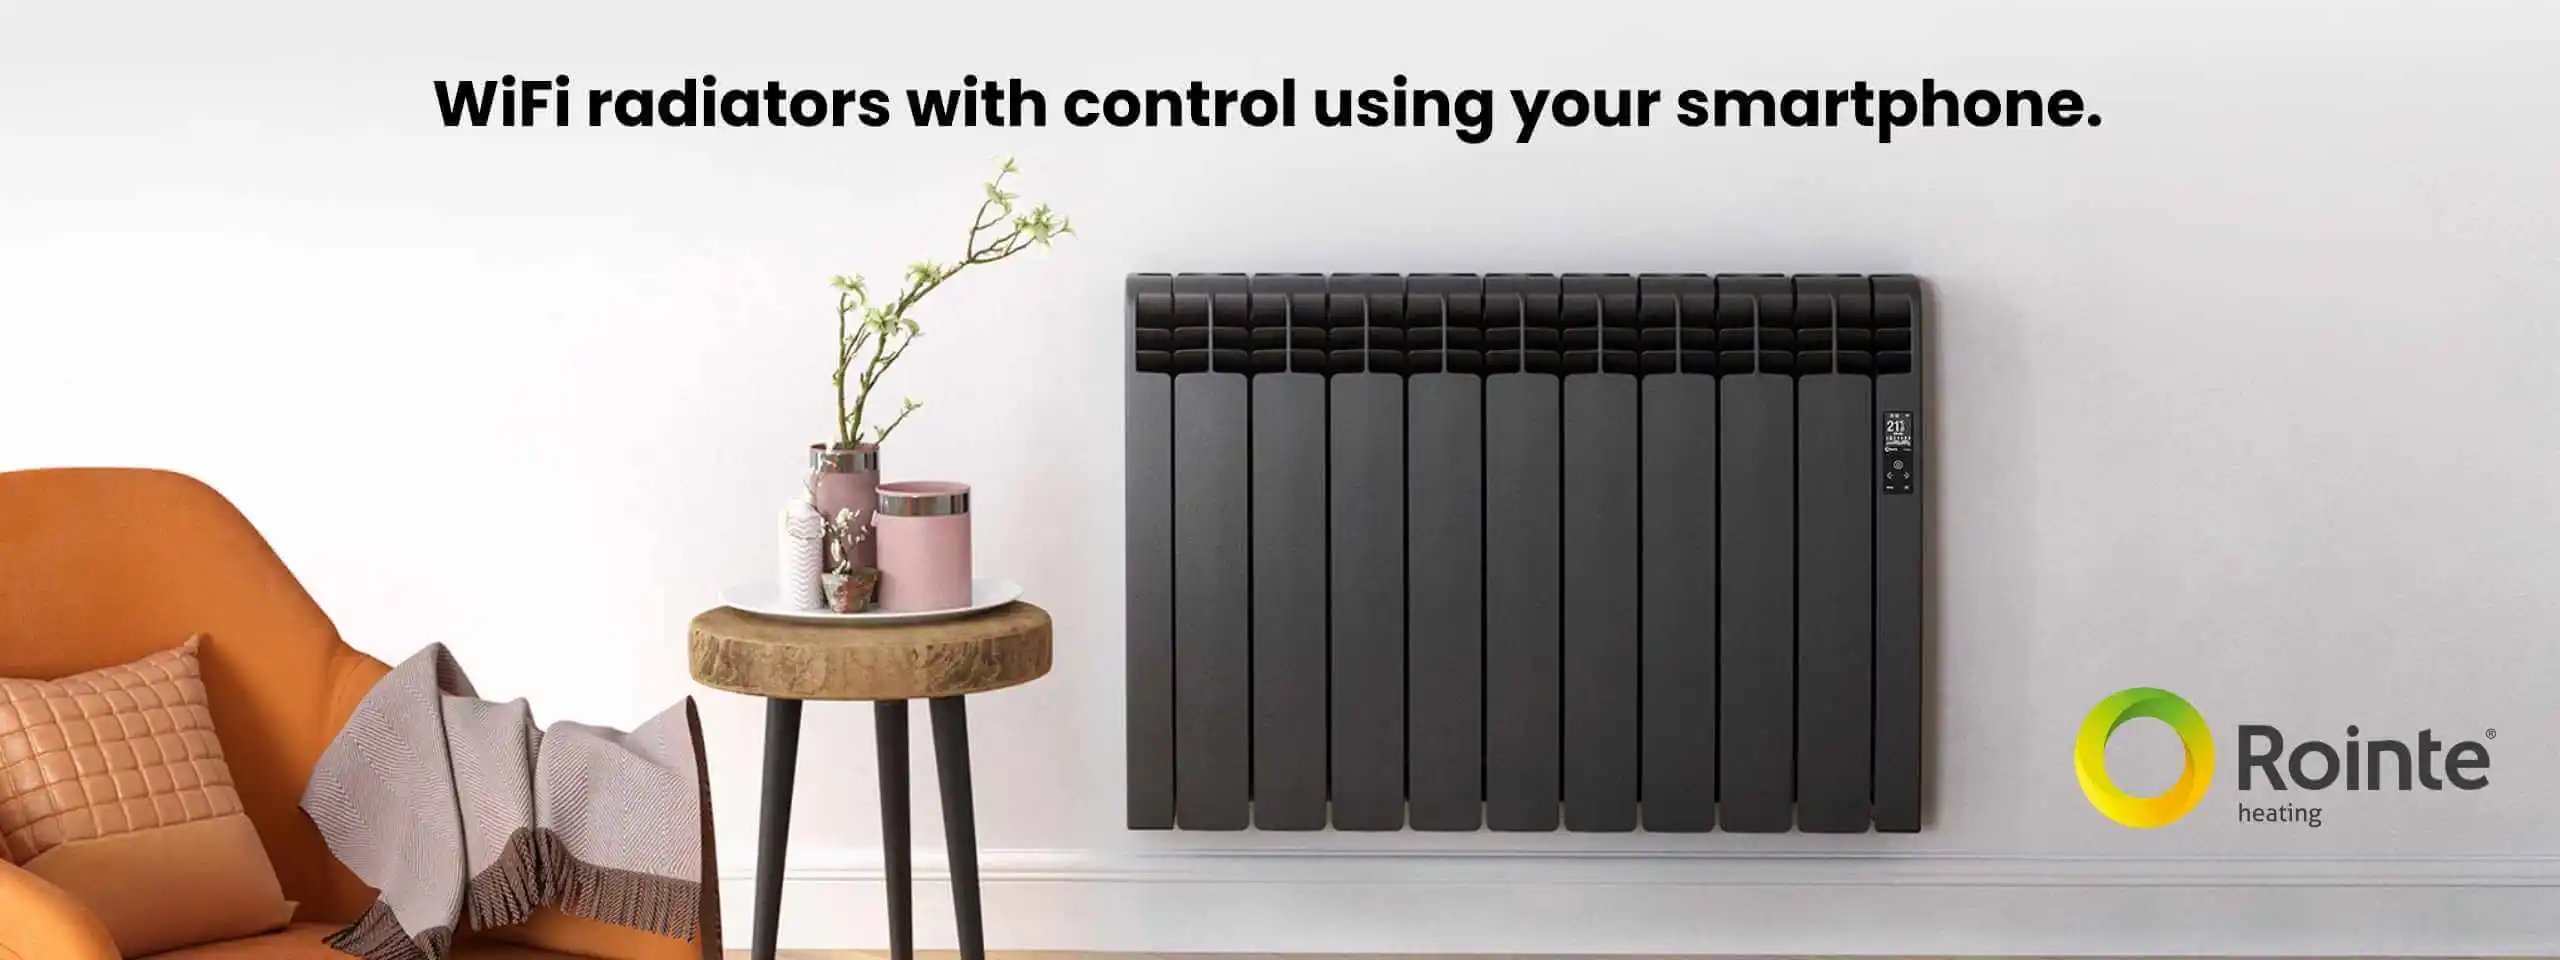 Image of the advanced Rointe Heater, highlighting its WiFi-enabled features with the slogan 'WiFi radiators with control via a smartphone